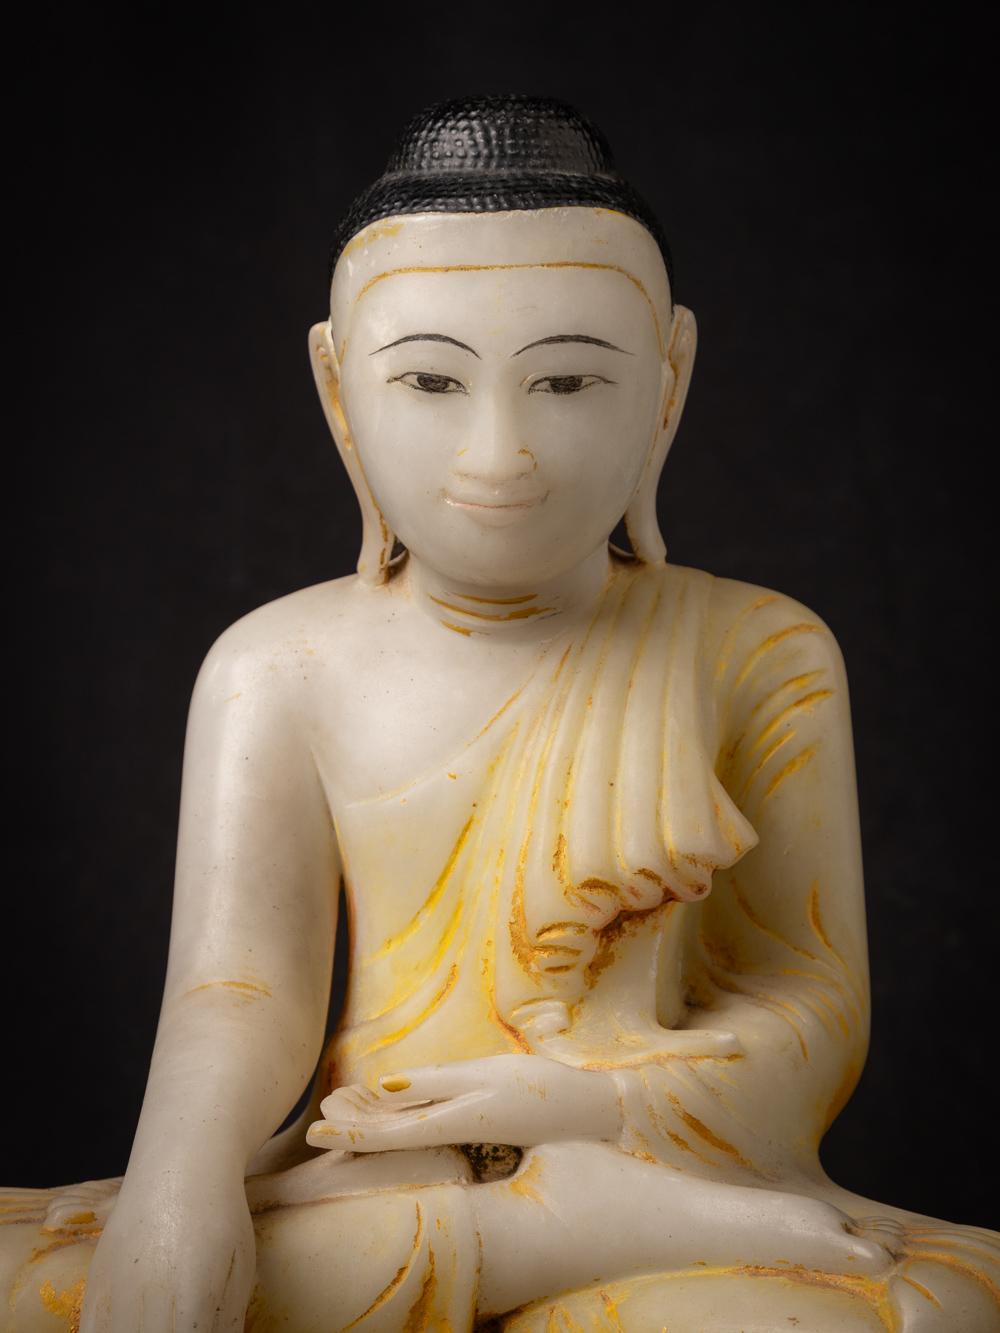 This antique marble Burmese Buddha statue is a magnificent representation of Buddhist devotion. Crafted from marble, it stands at an impressive height of 48 cm and has dimensions of 41.4 cm in width and 26 cm in depth. 

The statue is depicted in